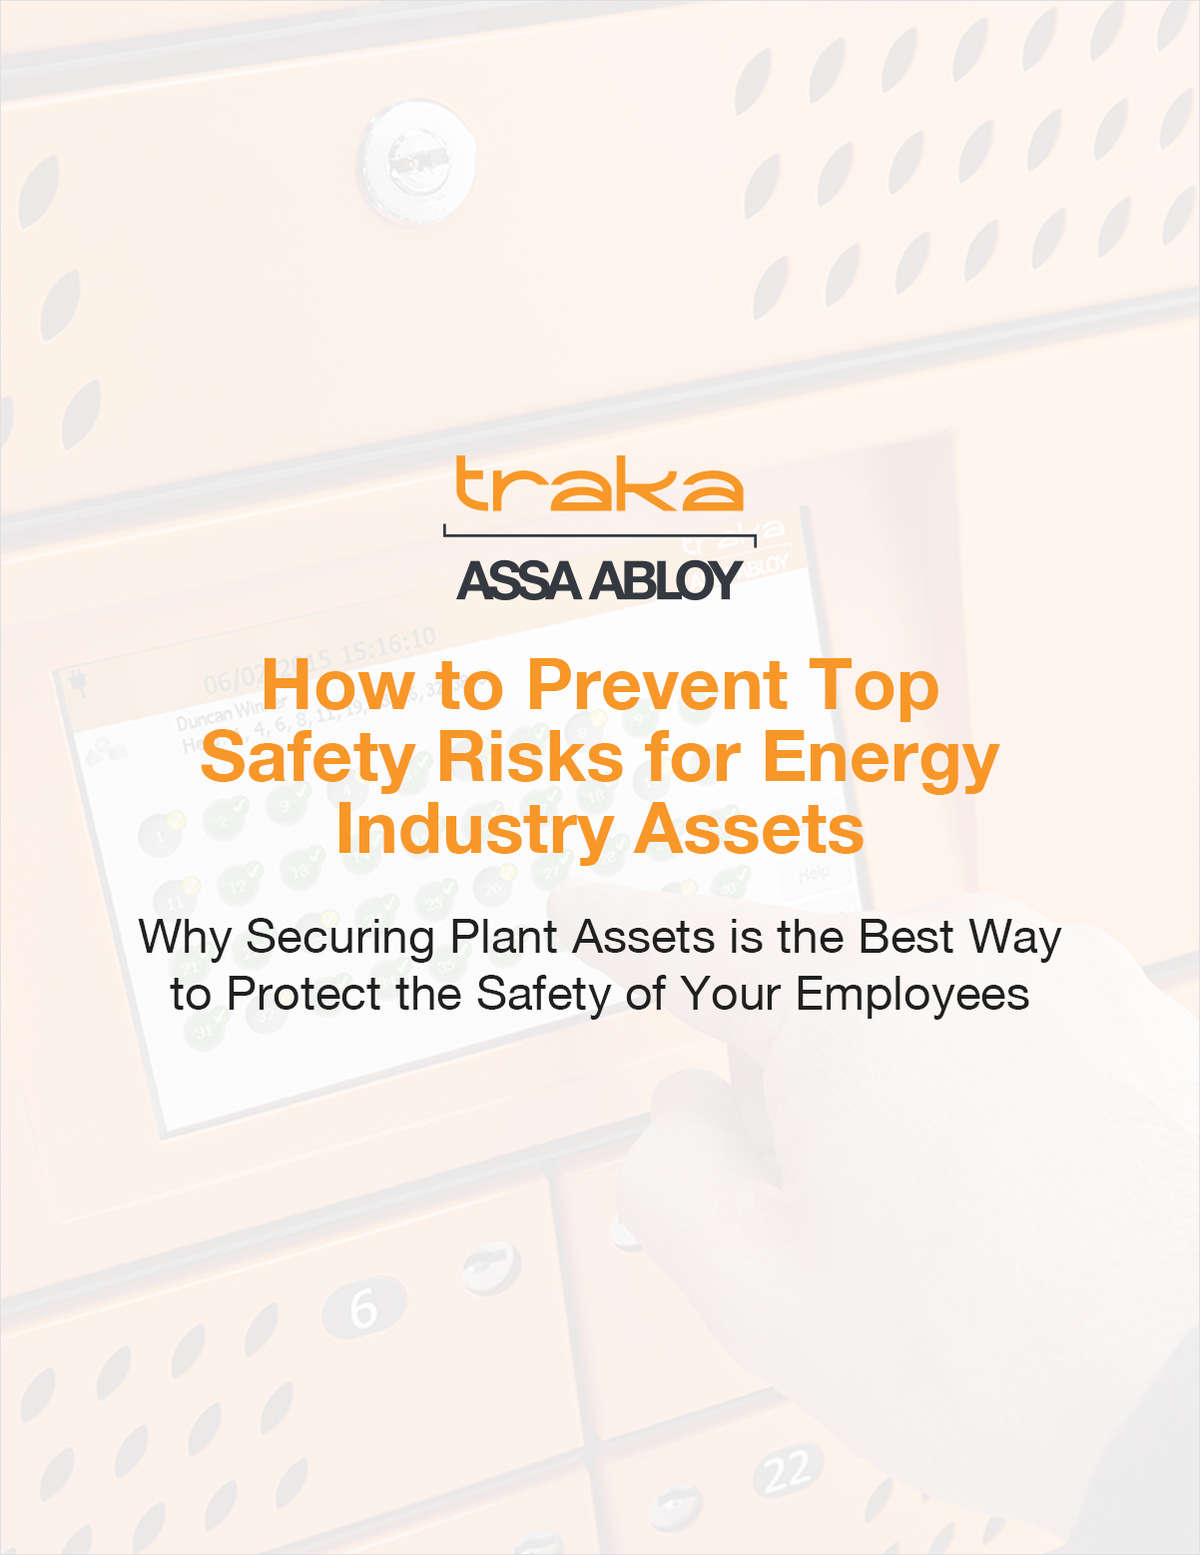 How to Prevent Top Safety Risks for Energy Industry Assets